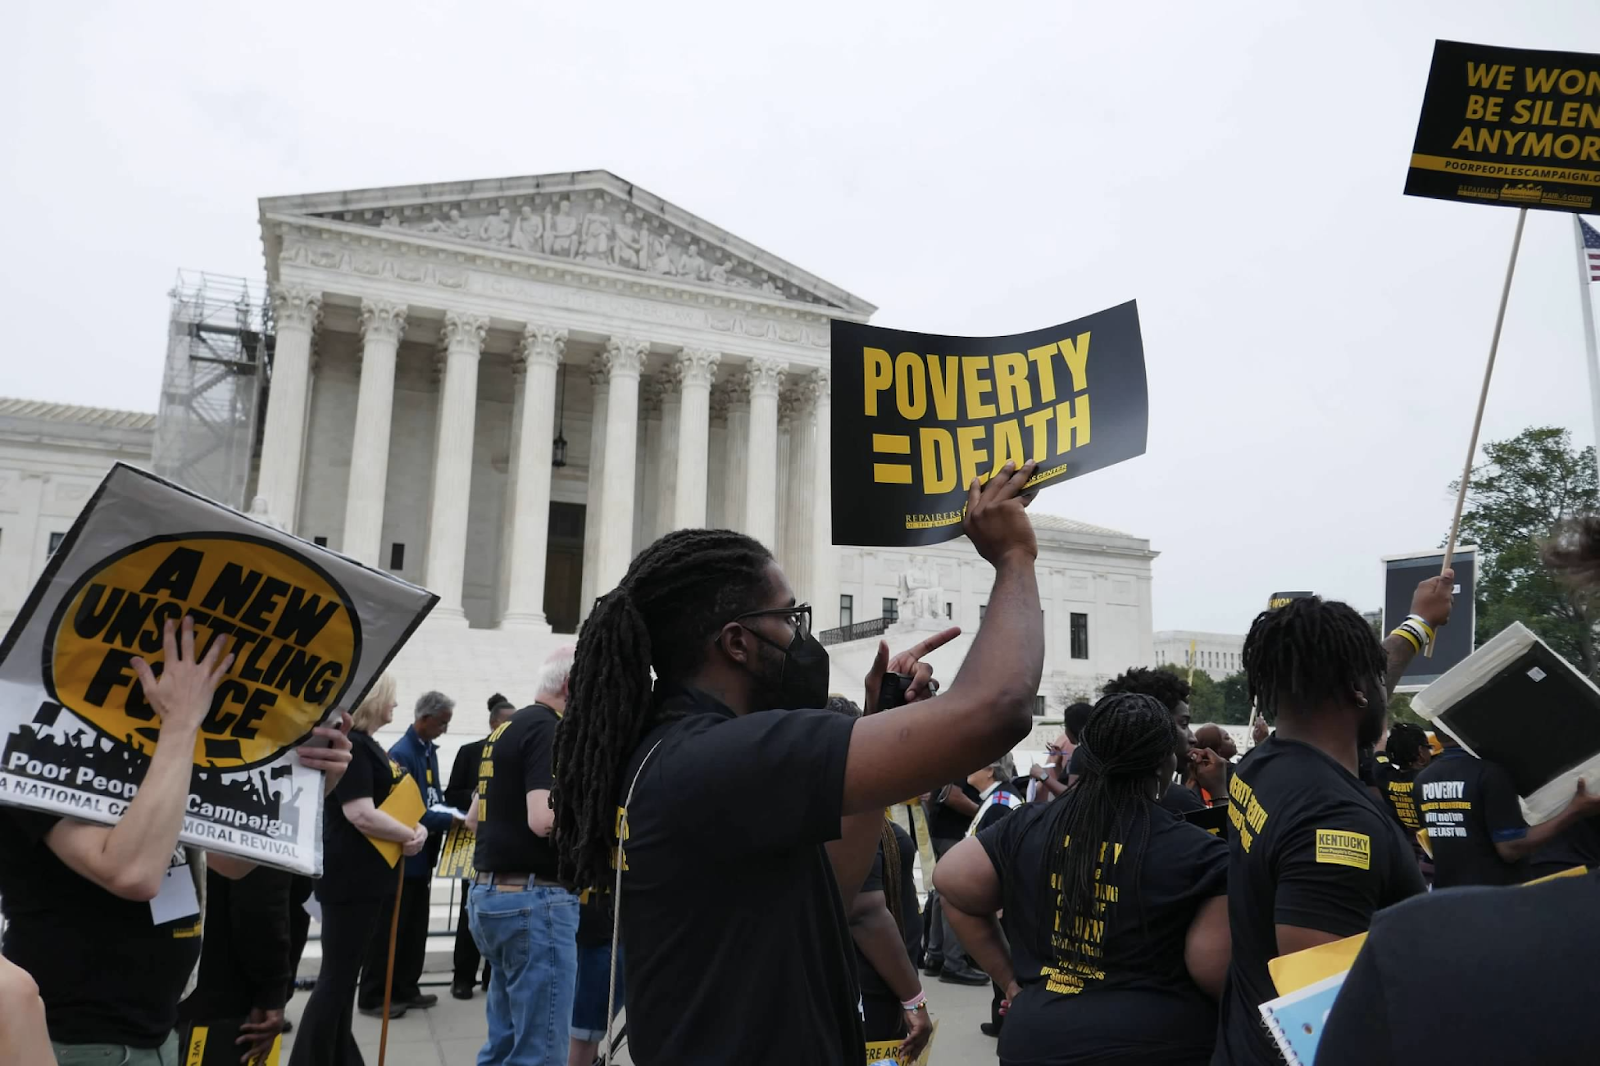 A Peek into the Poor People’s Campaign Moral Poverty Action Congress